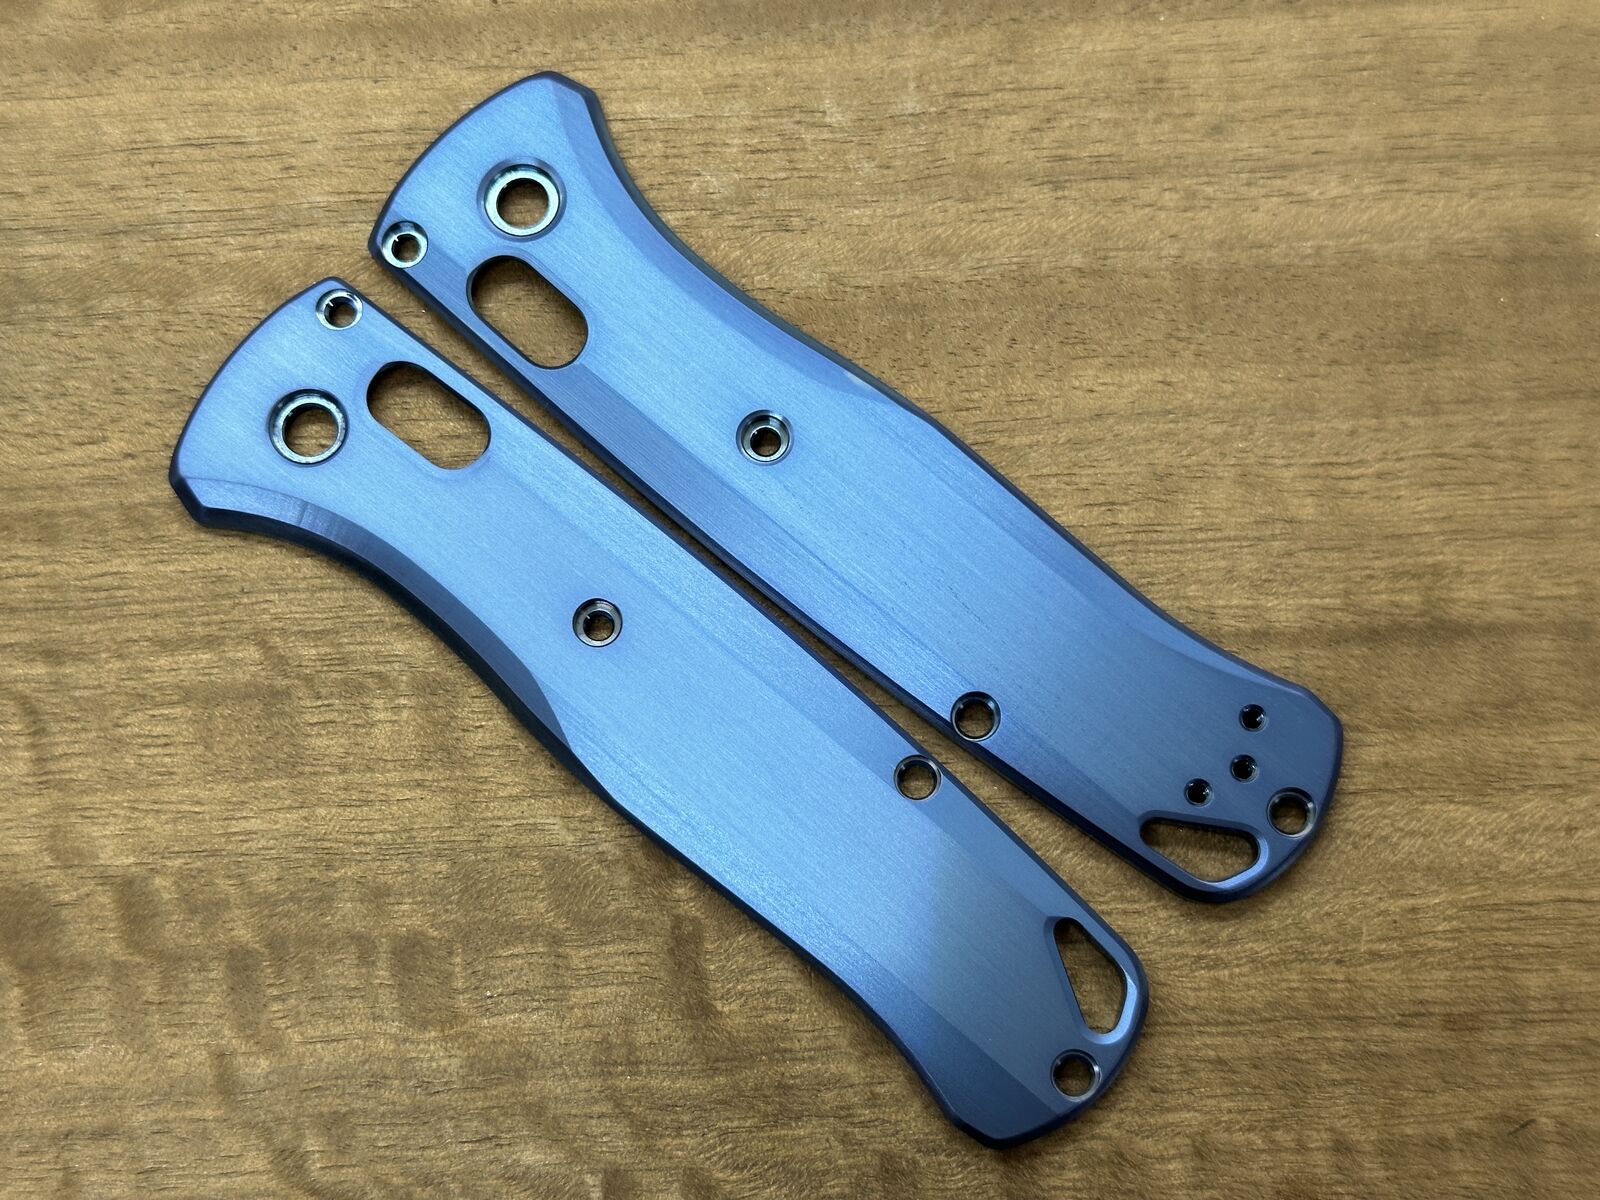 BLUE anodized Titanium Scales for Benchmade Bugout 535